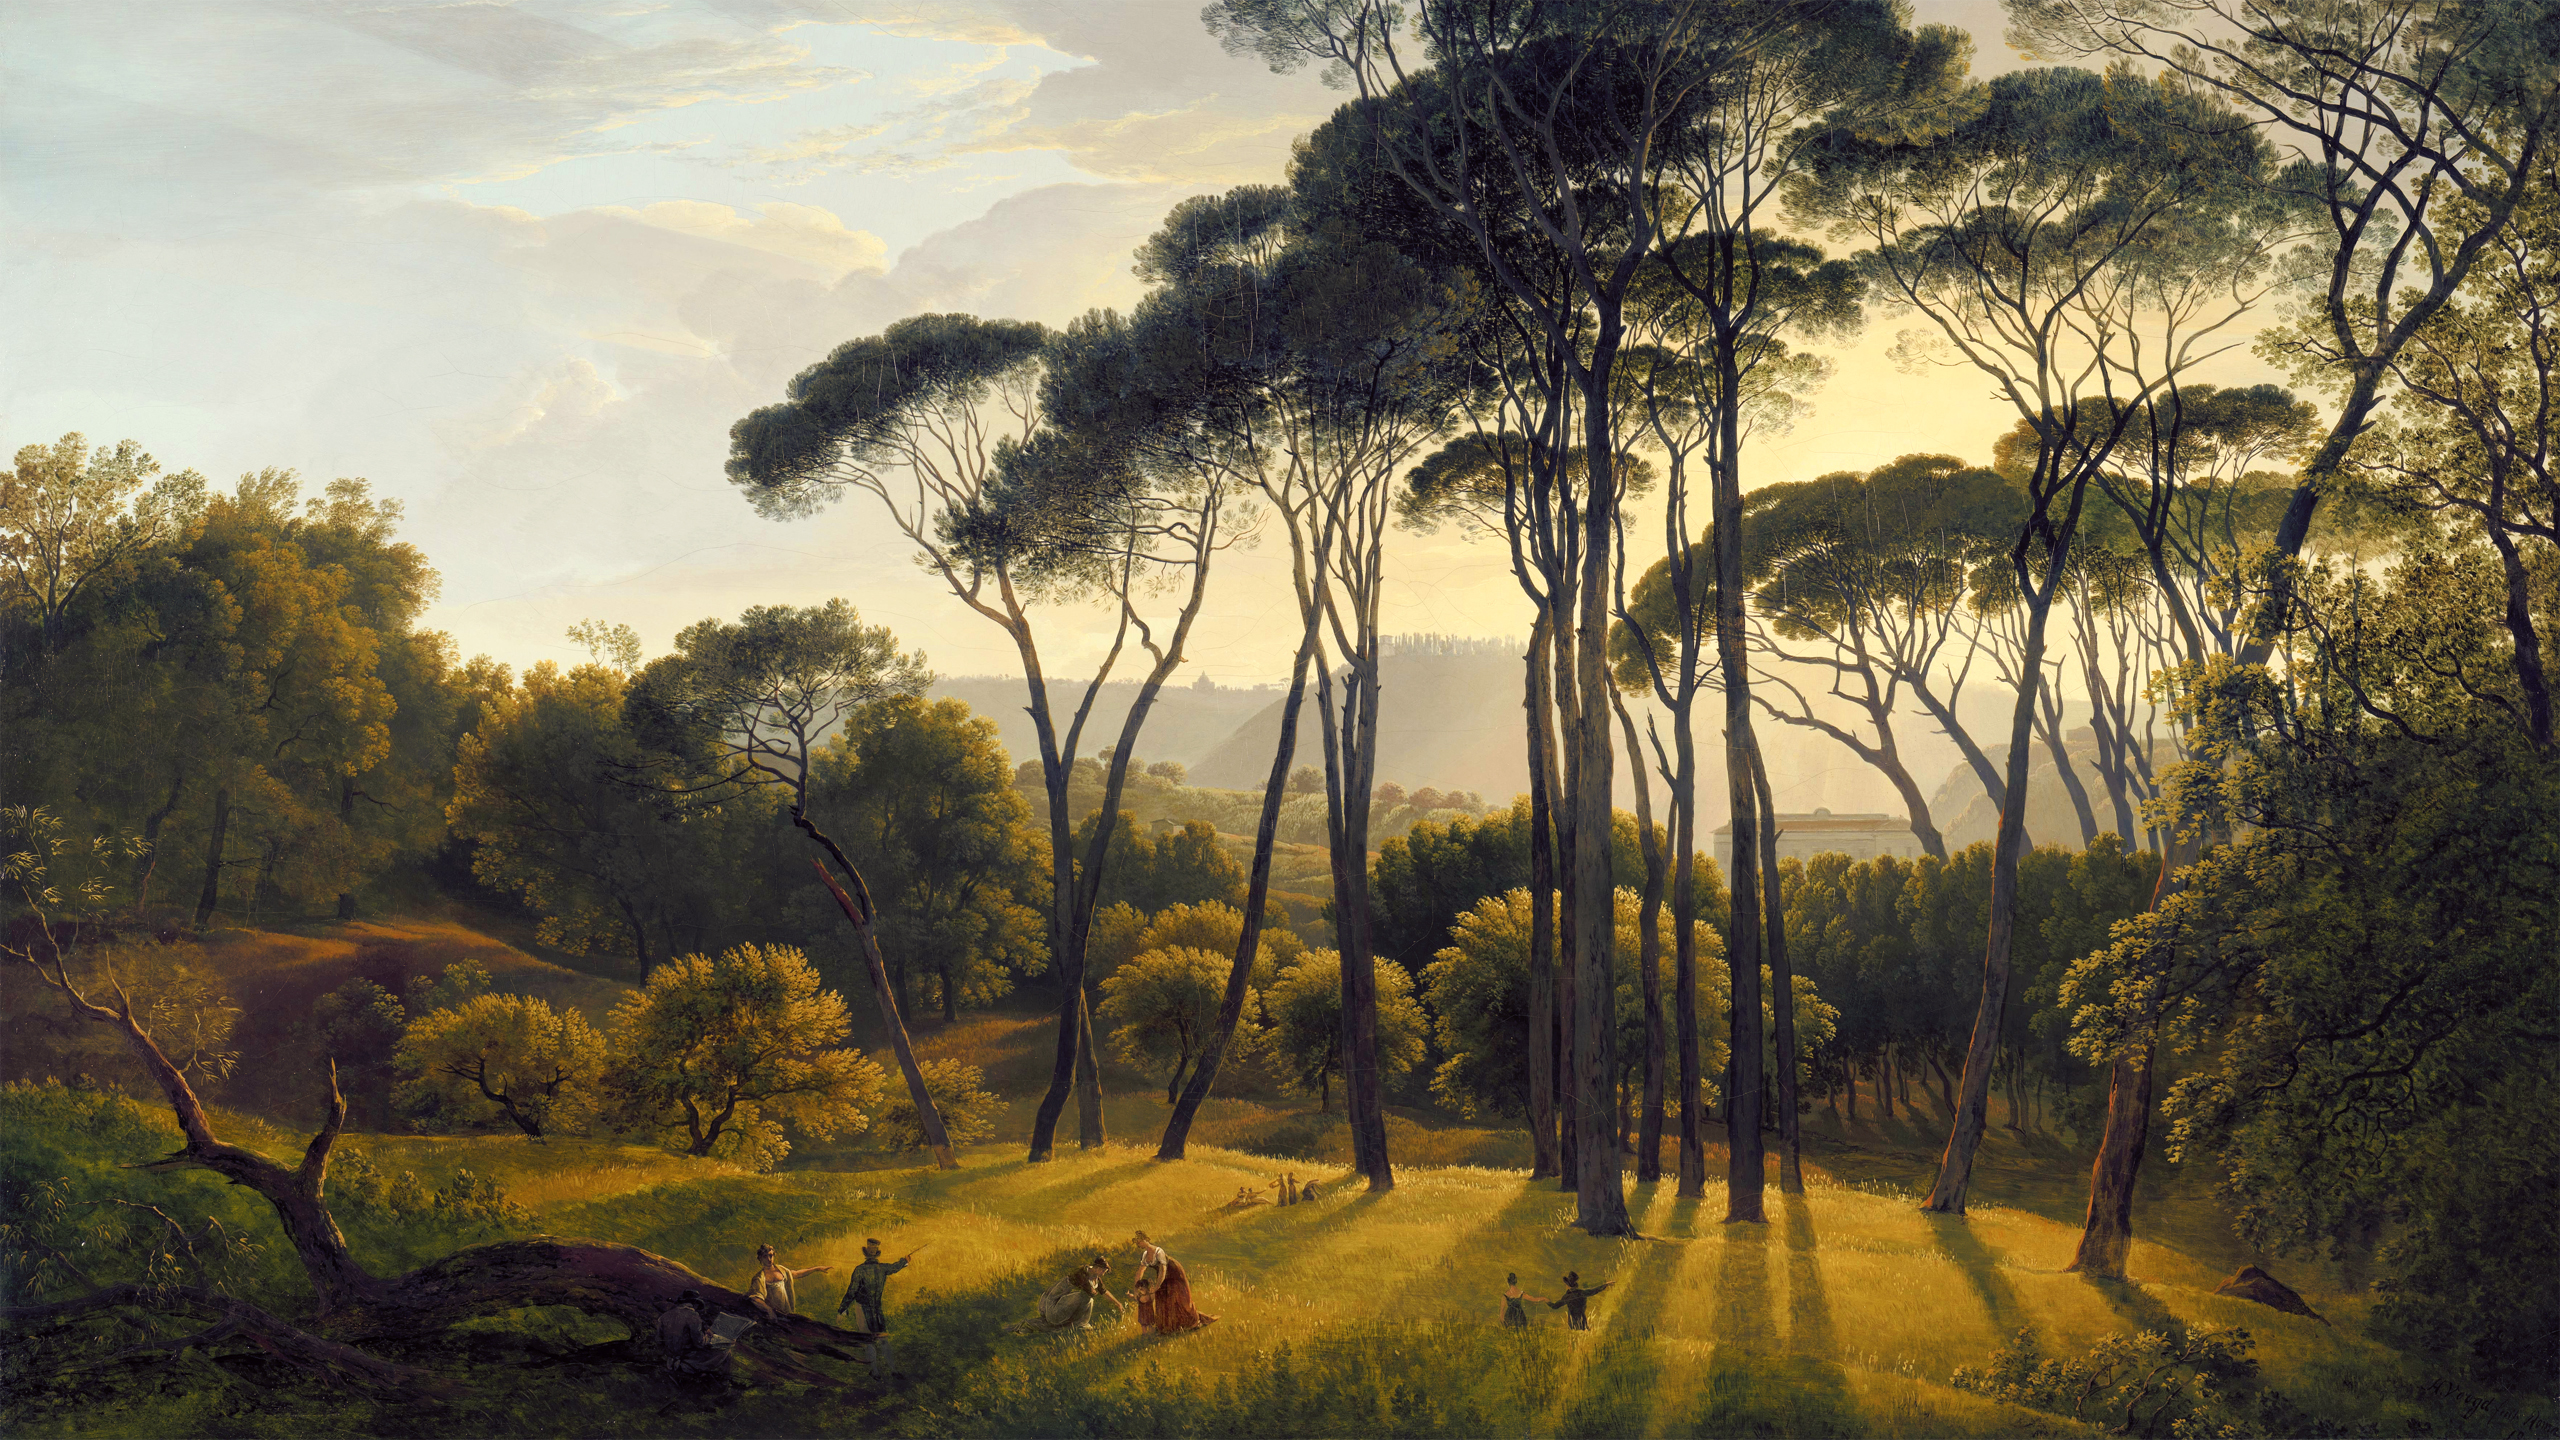 Artwork Plants Painting Trees Grass Vintage Sunlight Nature Forest Classic Art 2560x1440